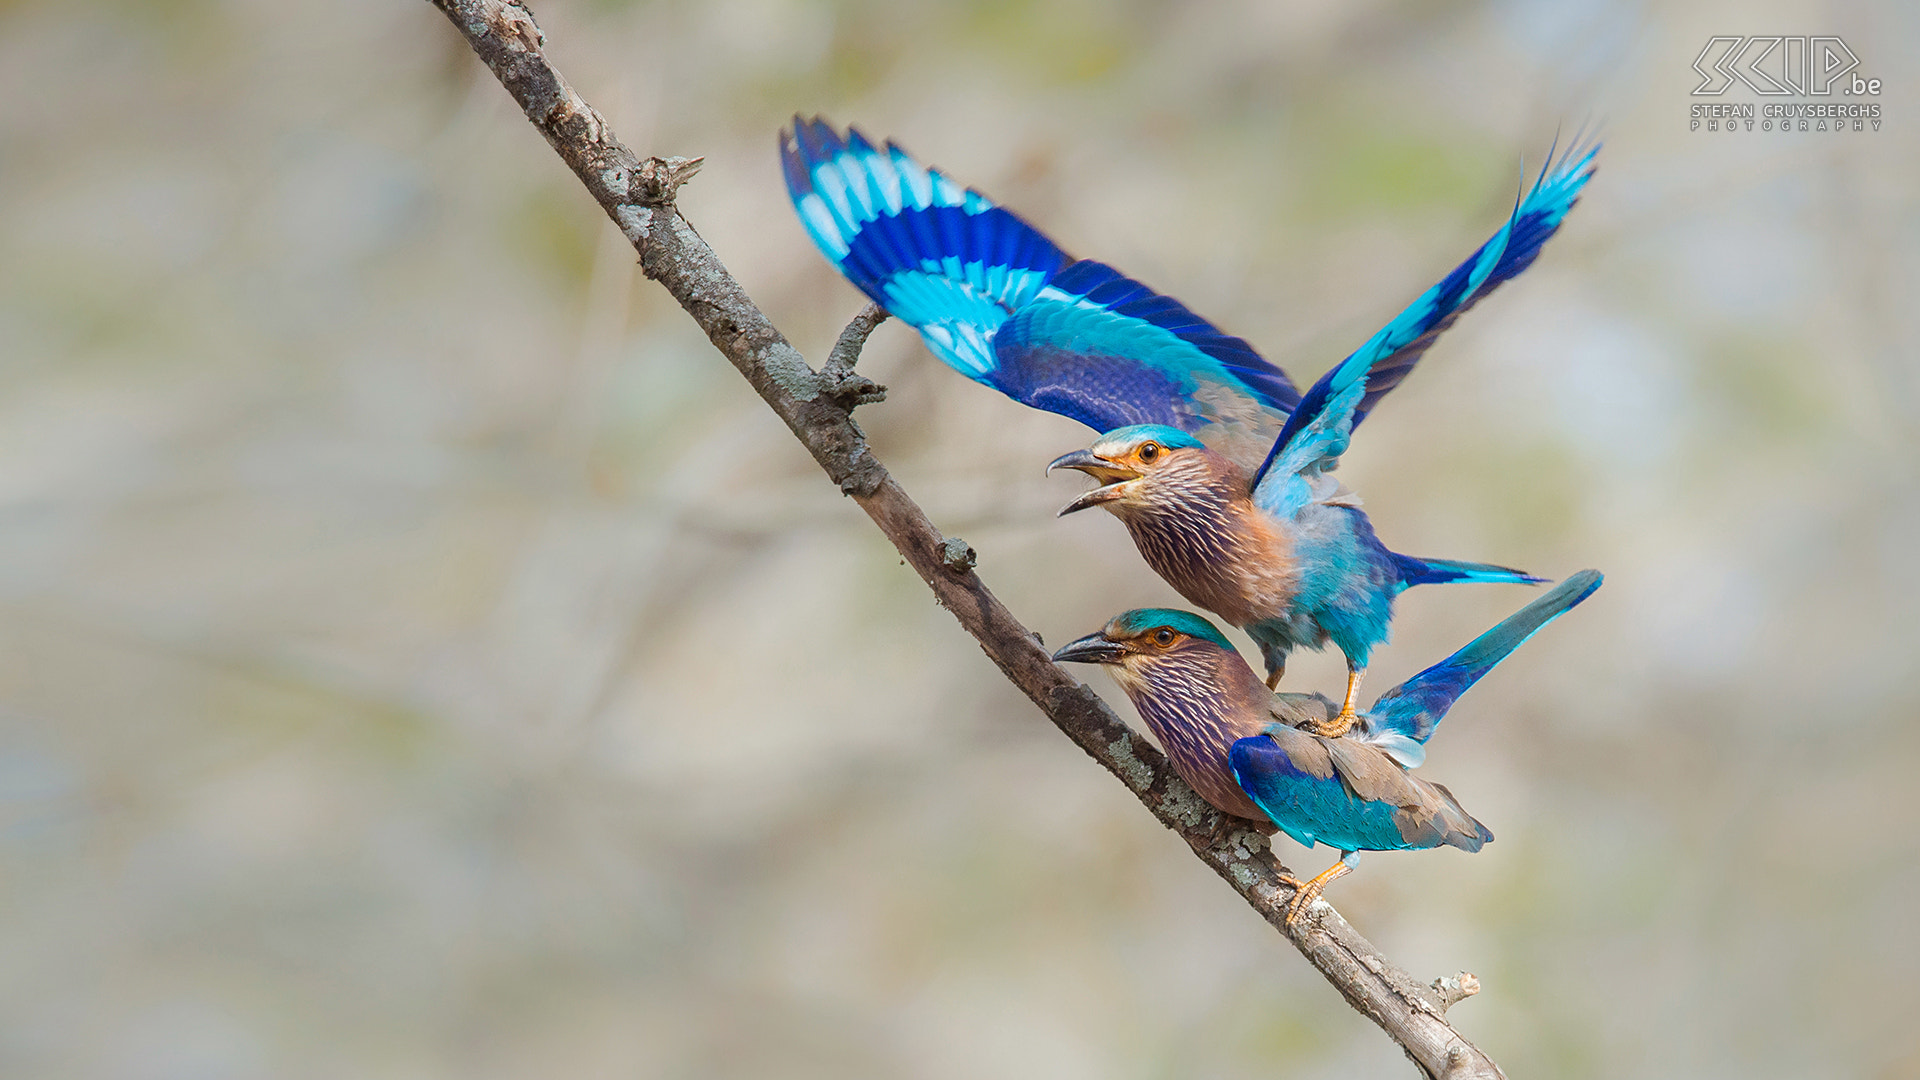 Nikon D610 + Sigma 150-600mm F5-6.3 DG OS HSM | S sample photo. Mating indian rollers photography